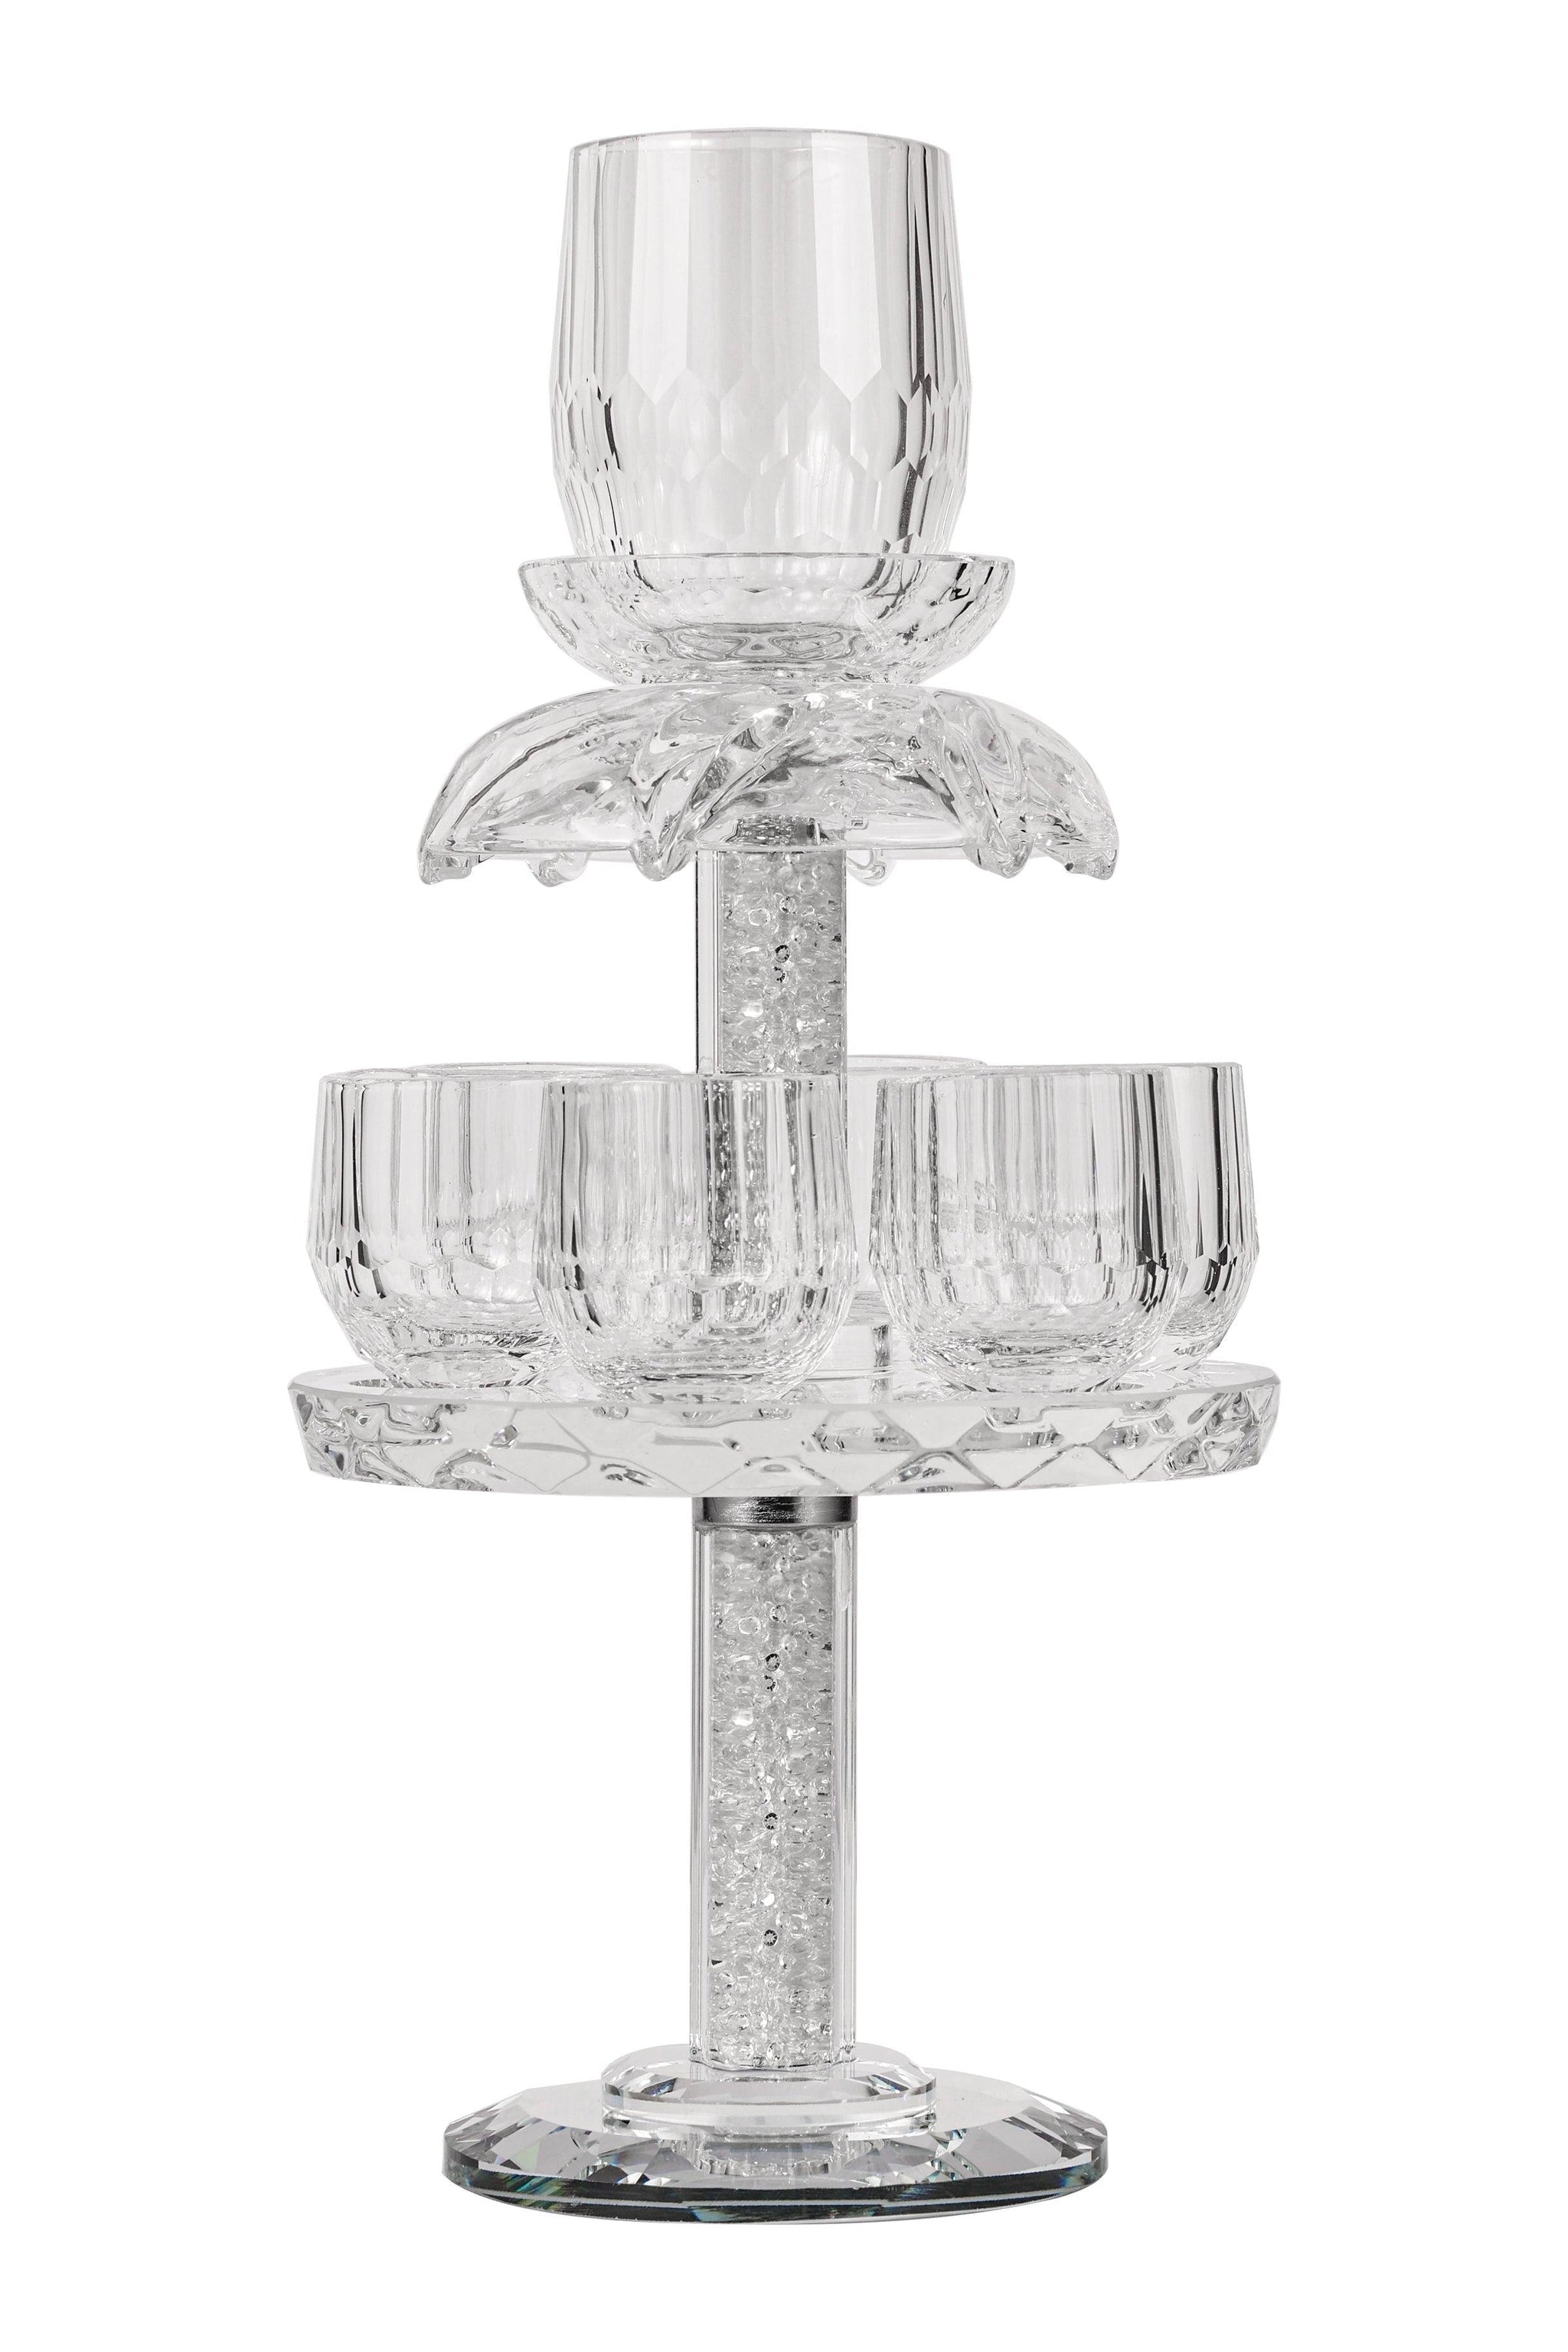 Crystal Glass Stem Kiddush Cup and Tray - Decorative Crushed Clear Stones